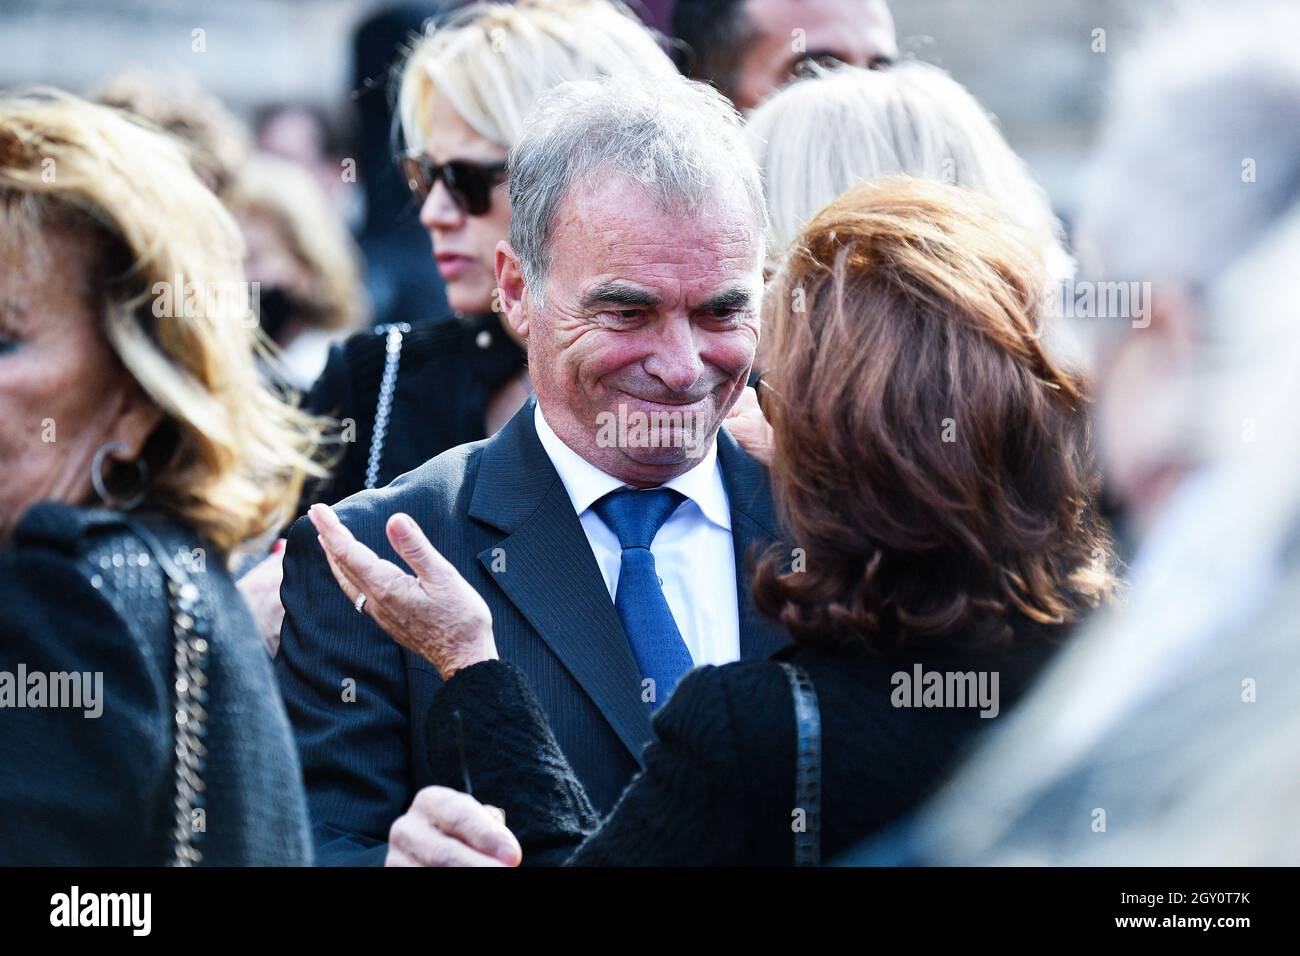 French former professional cyclist Bernard Hinault and Dominique Tapie  during a tribute mass for French tycoon Bernard Tapie at Saint Germain des  Pres church in Paris, France on October 6, 2021. The